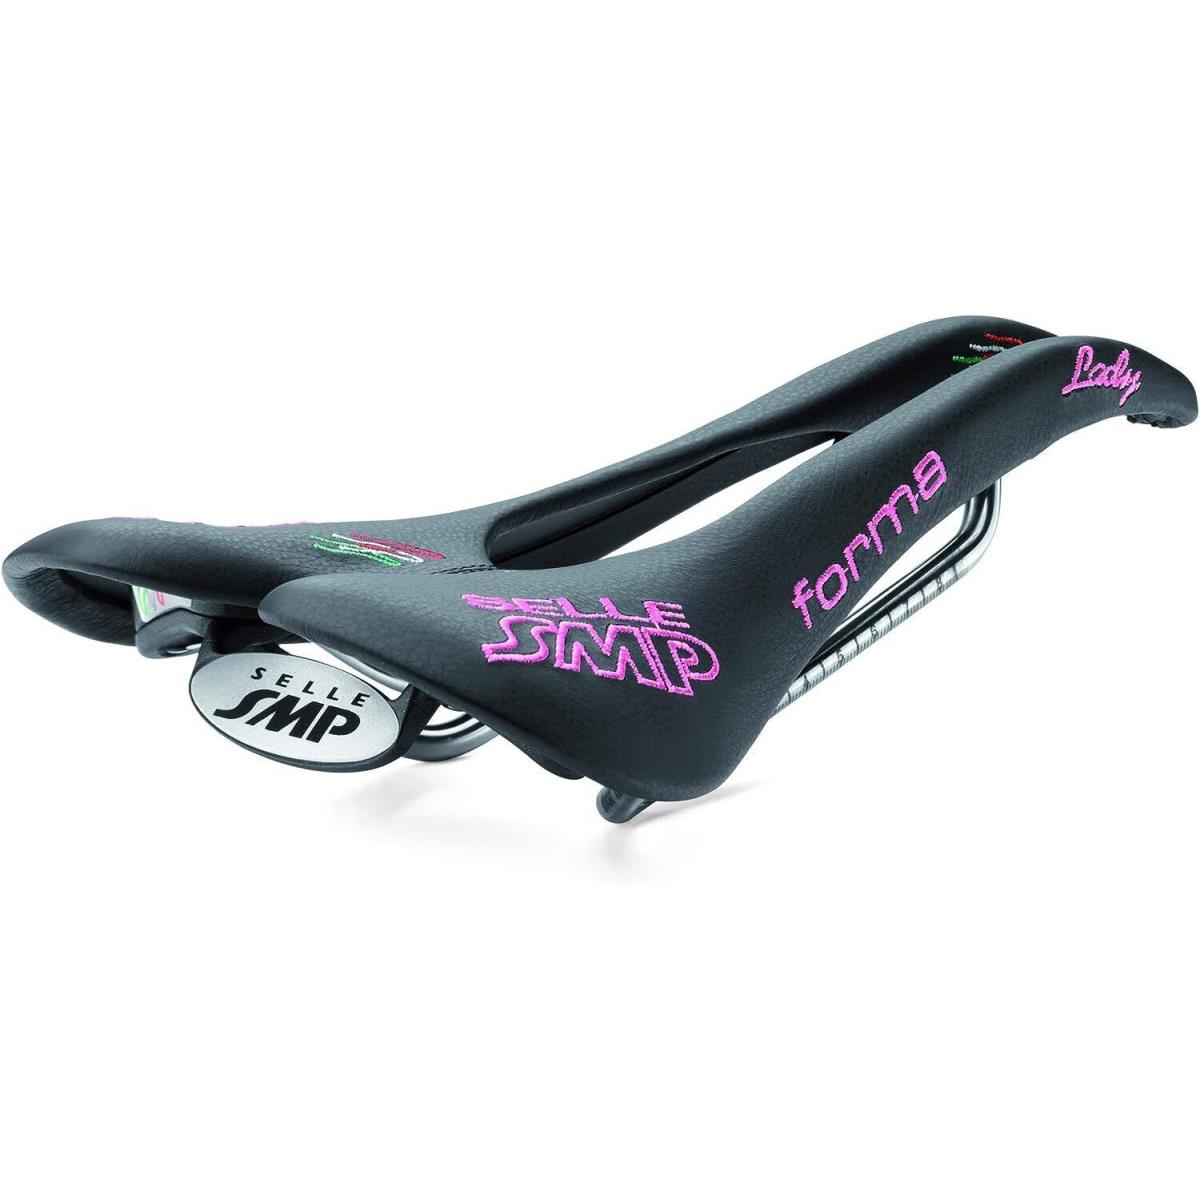 Selle Smp Forma Lady Saddle Black Italian Leather Covering Pink Stitching Usa